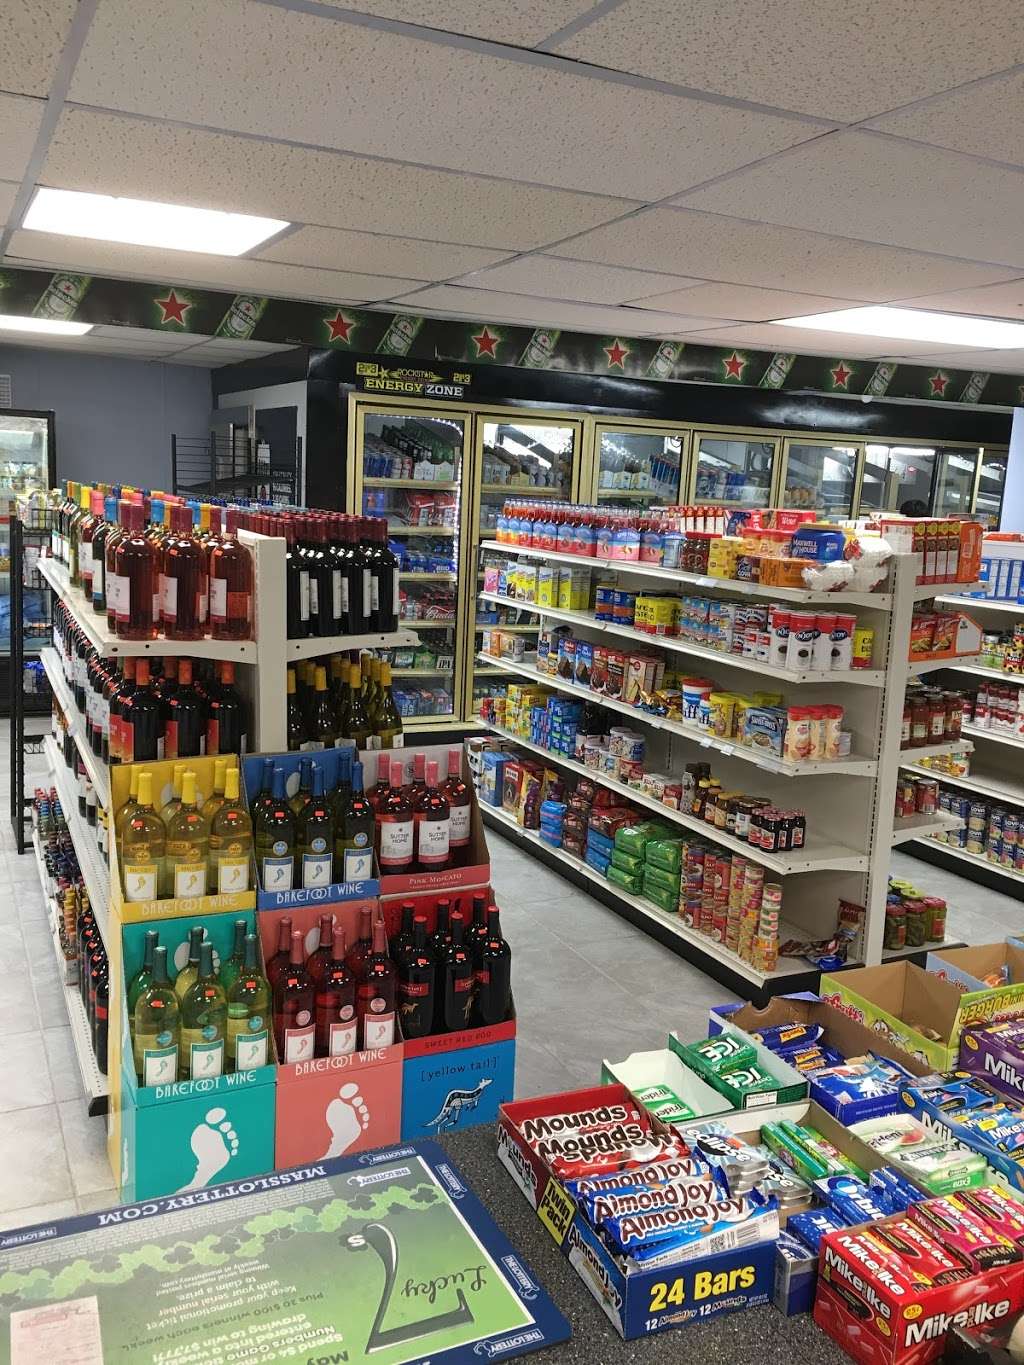 Castle Hill Mini Mart Beer and Wine | 280 Jefferson Ave, Salem, MA 01970 | Phone: (978) 745-5400